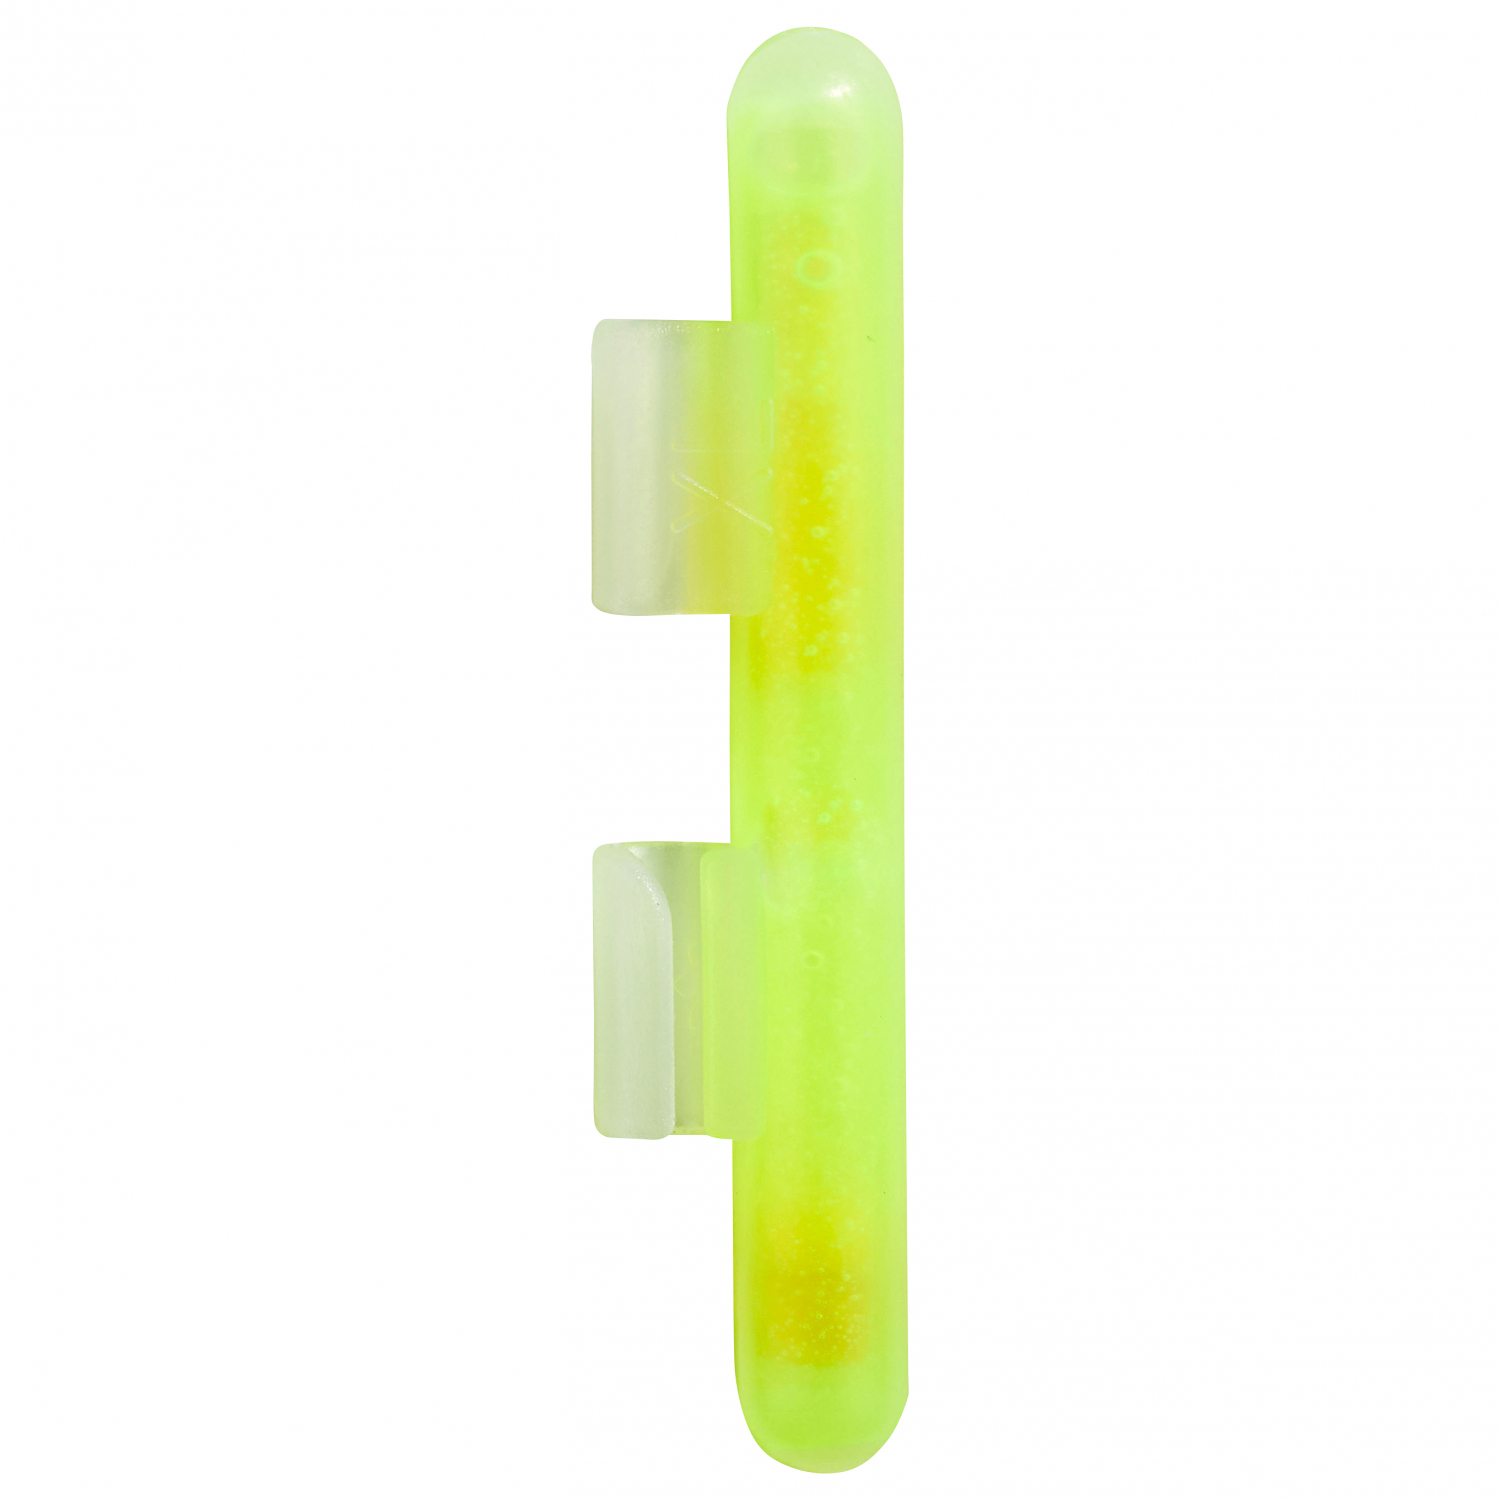 Balzer Glow Stick for Rod Tip at low prices